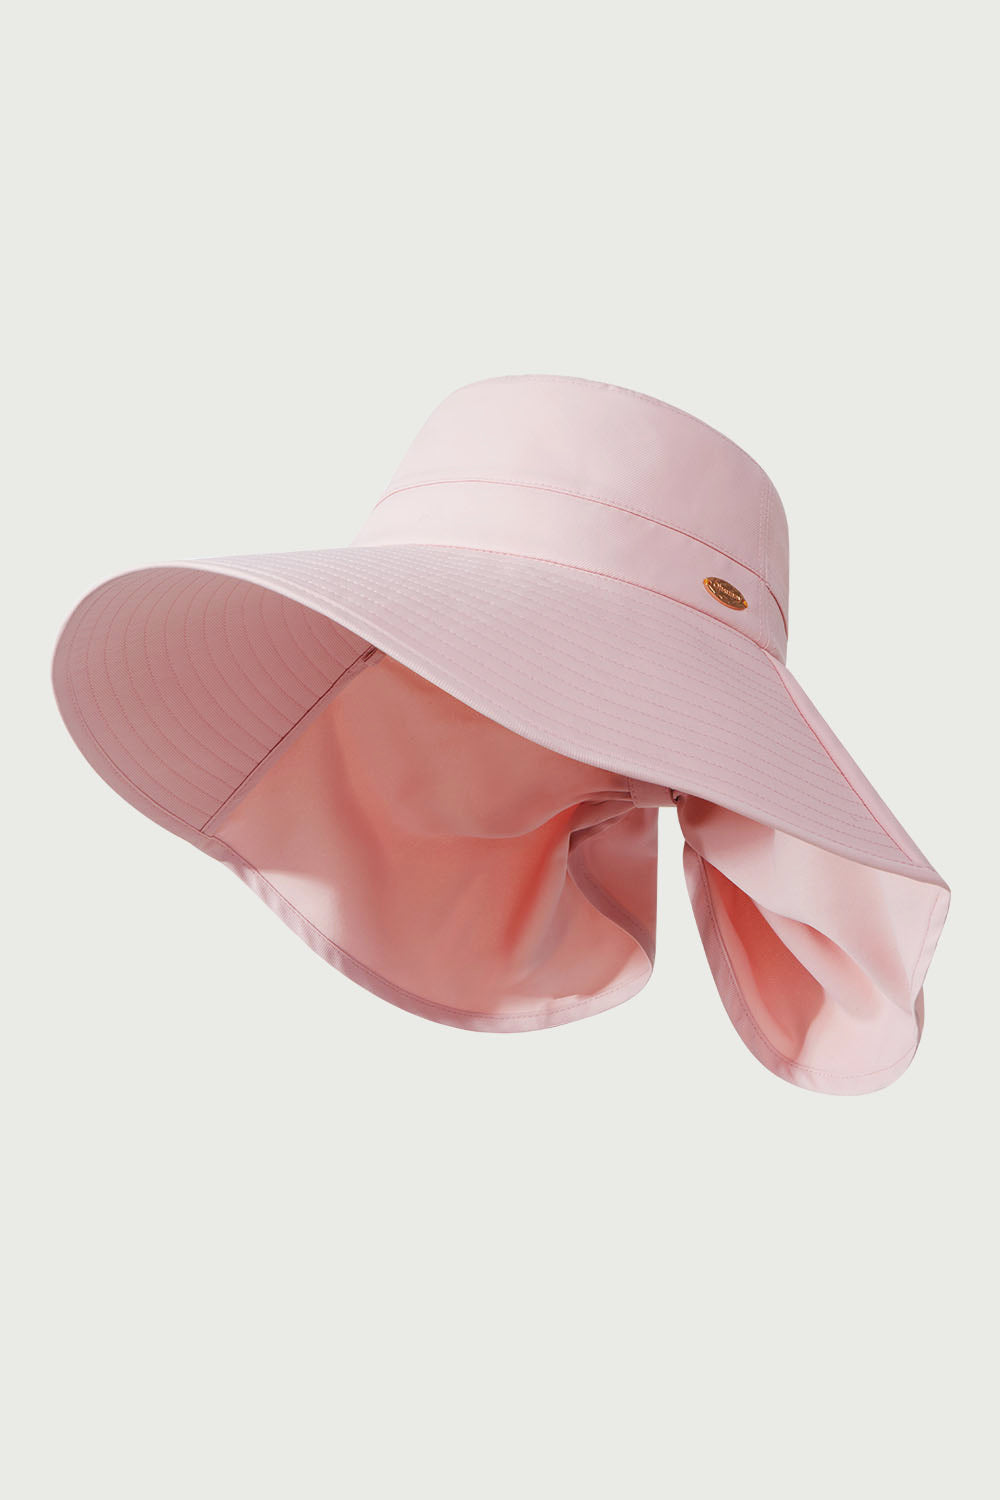 Oh Sunny Everyday Luxe Sun Hat UPF50+